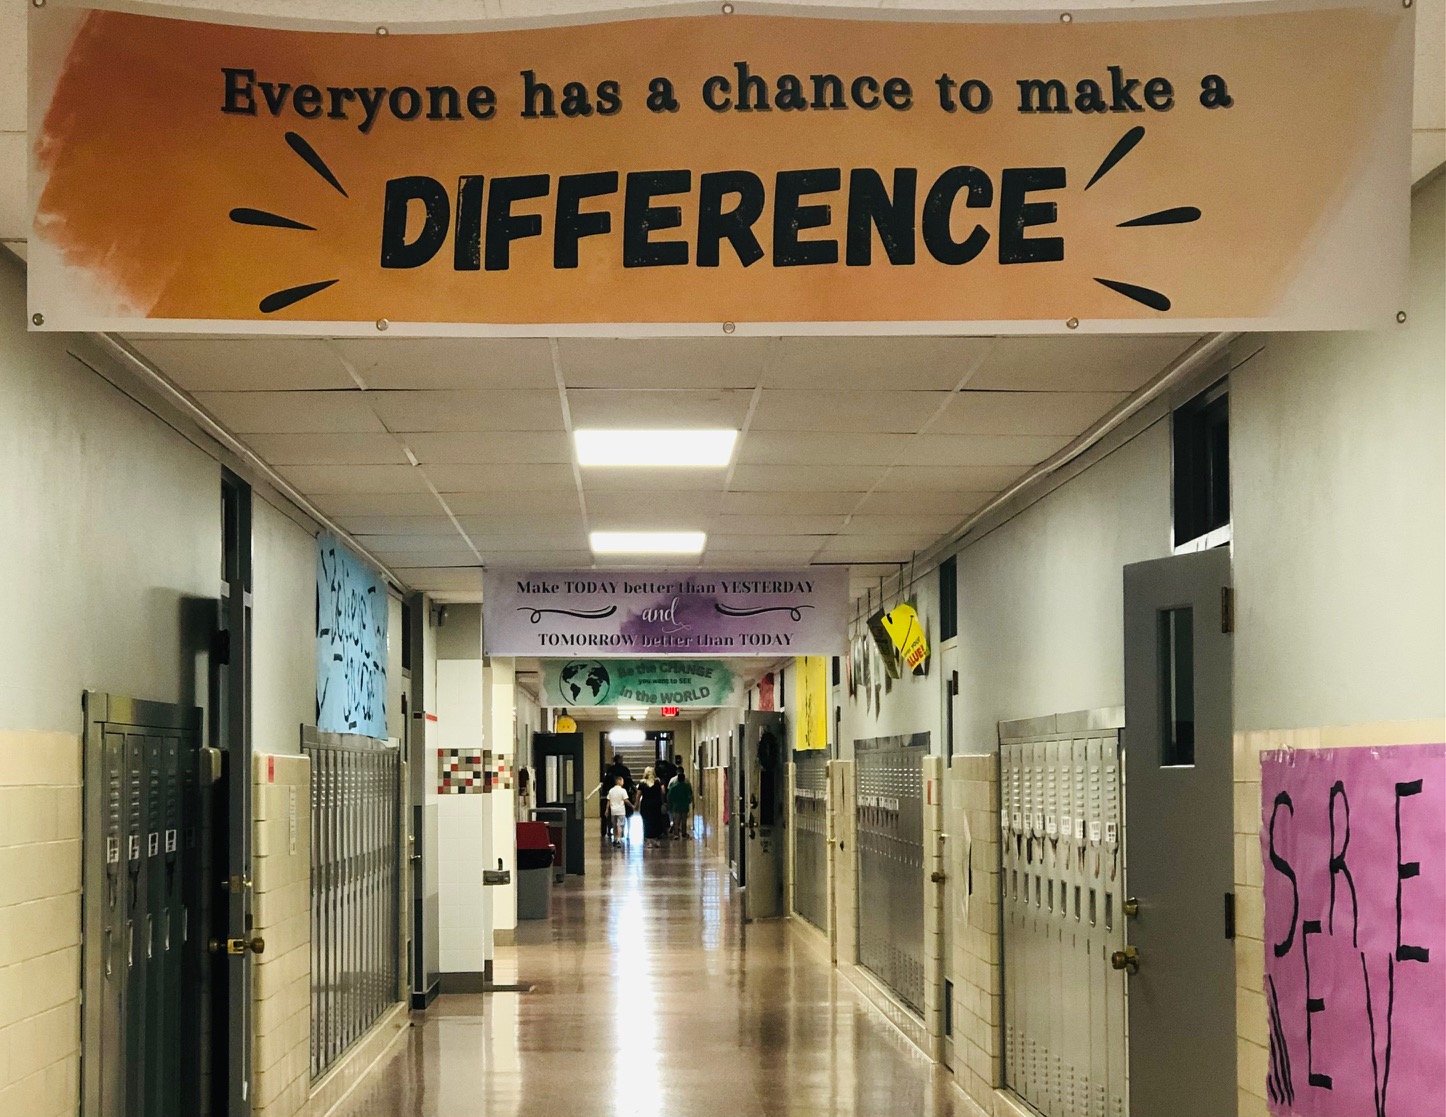 Everyone can make a difference poster